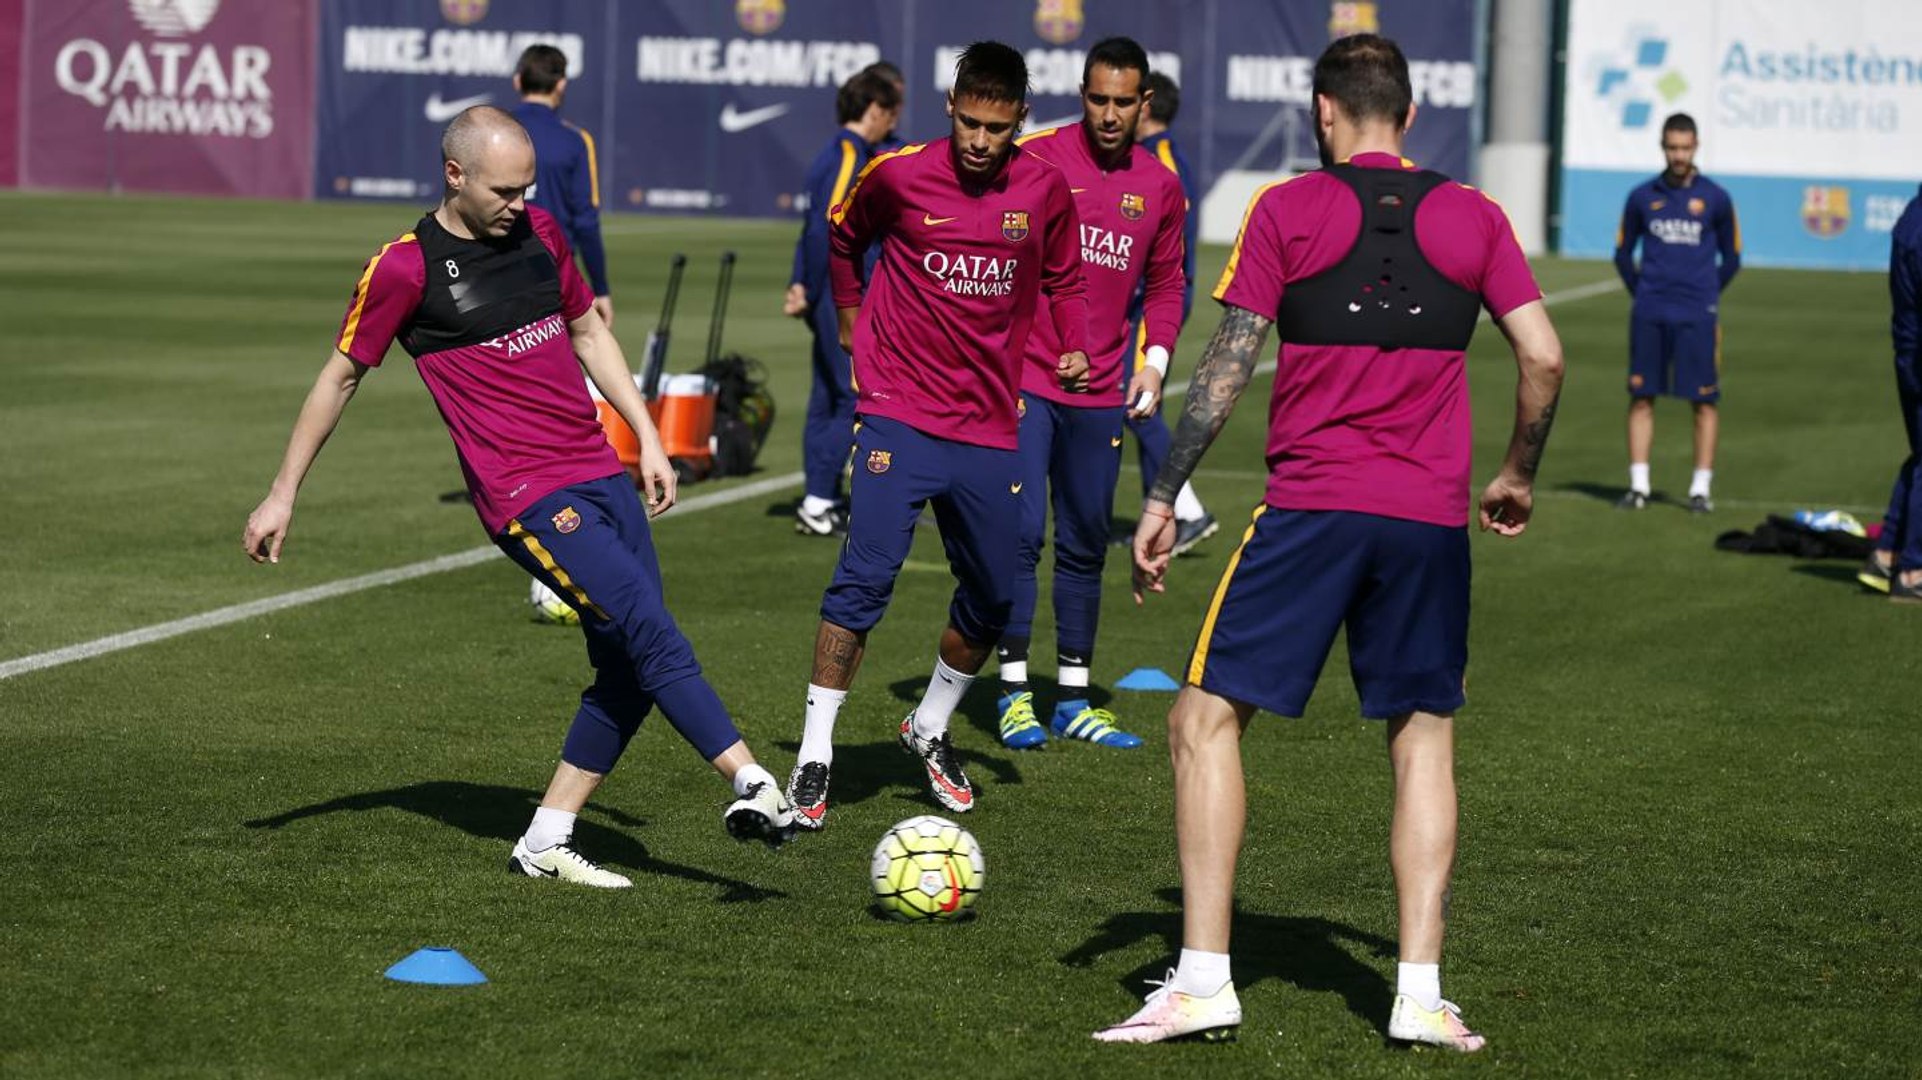 FC Barcelona training session: Preparations continue for El Clásico - video  Dailymotion